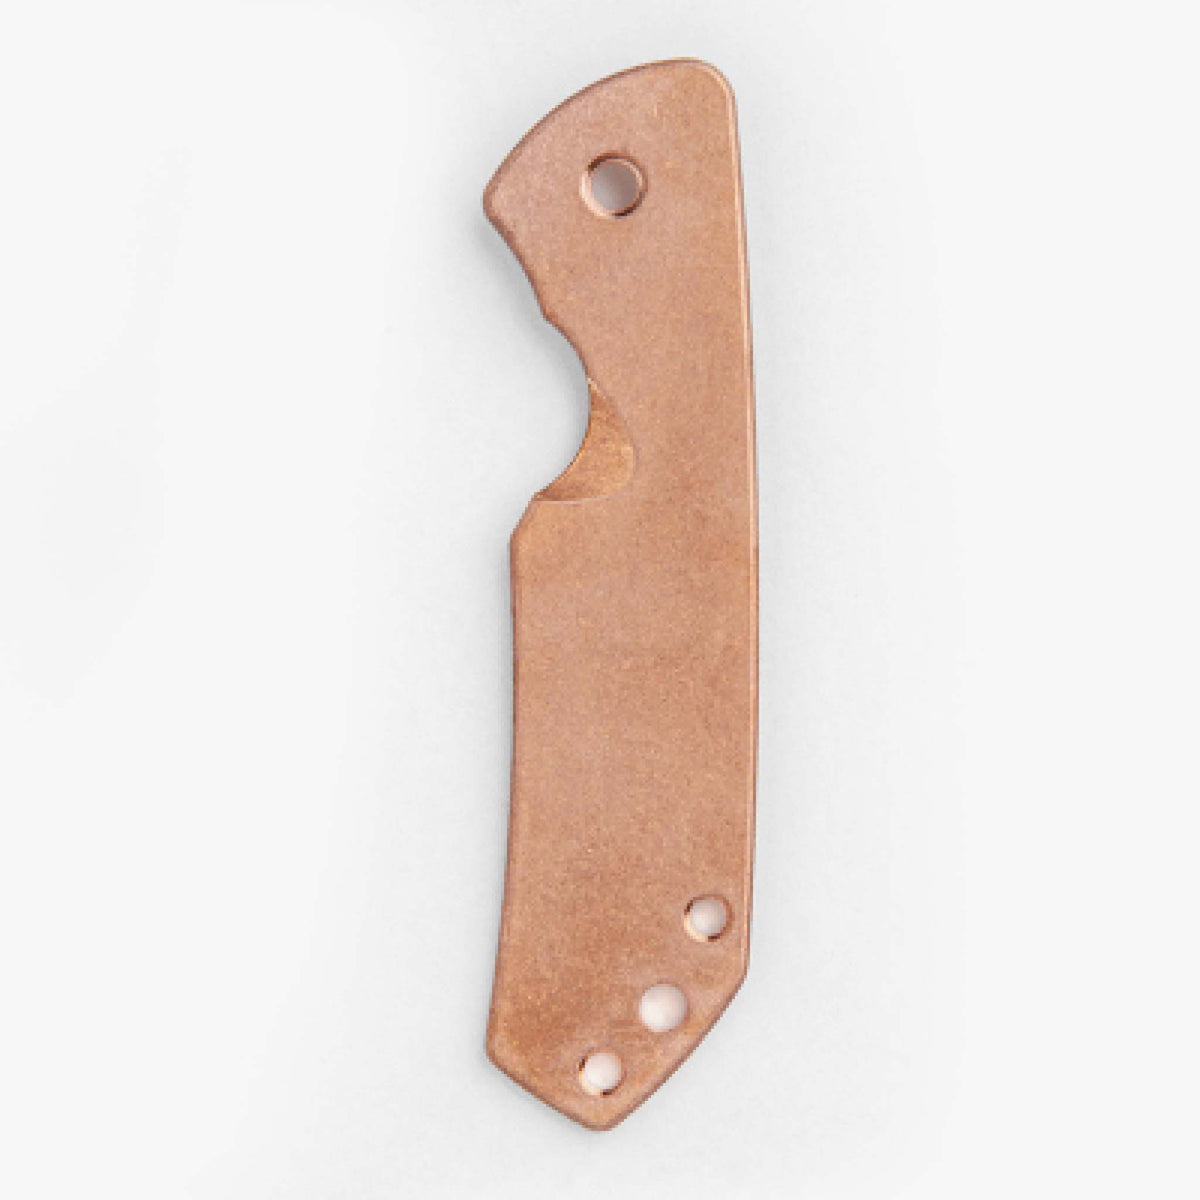 Copper Scale for Spyderco Brouwer Knife-Copper Stonewash